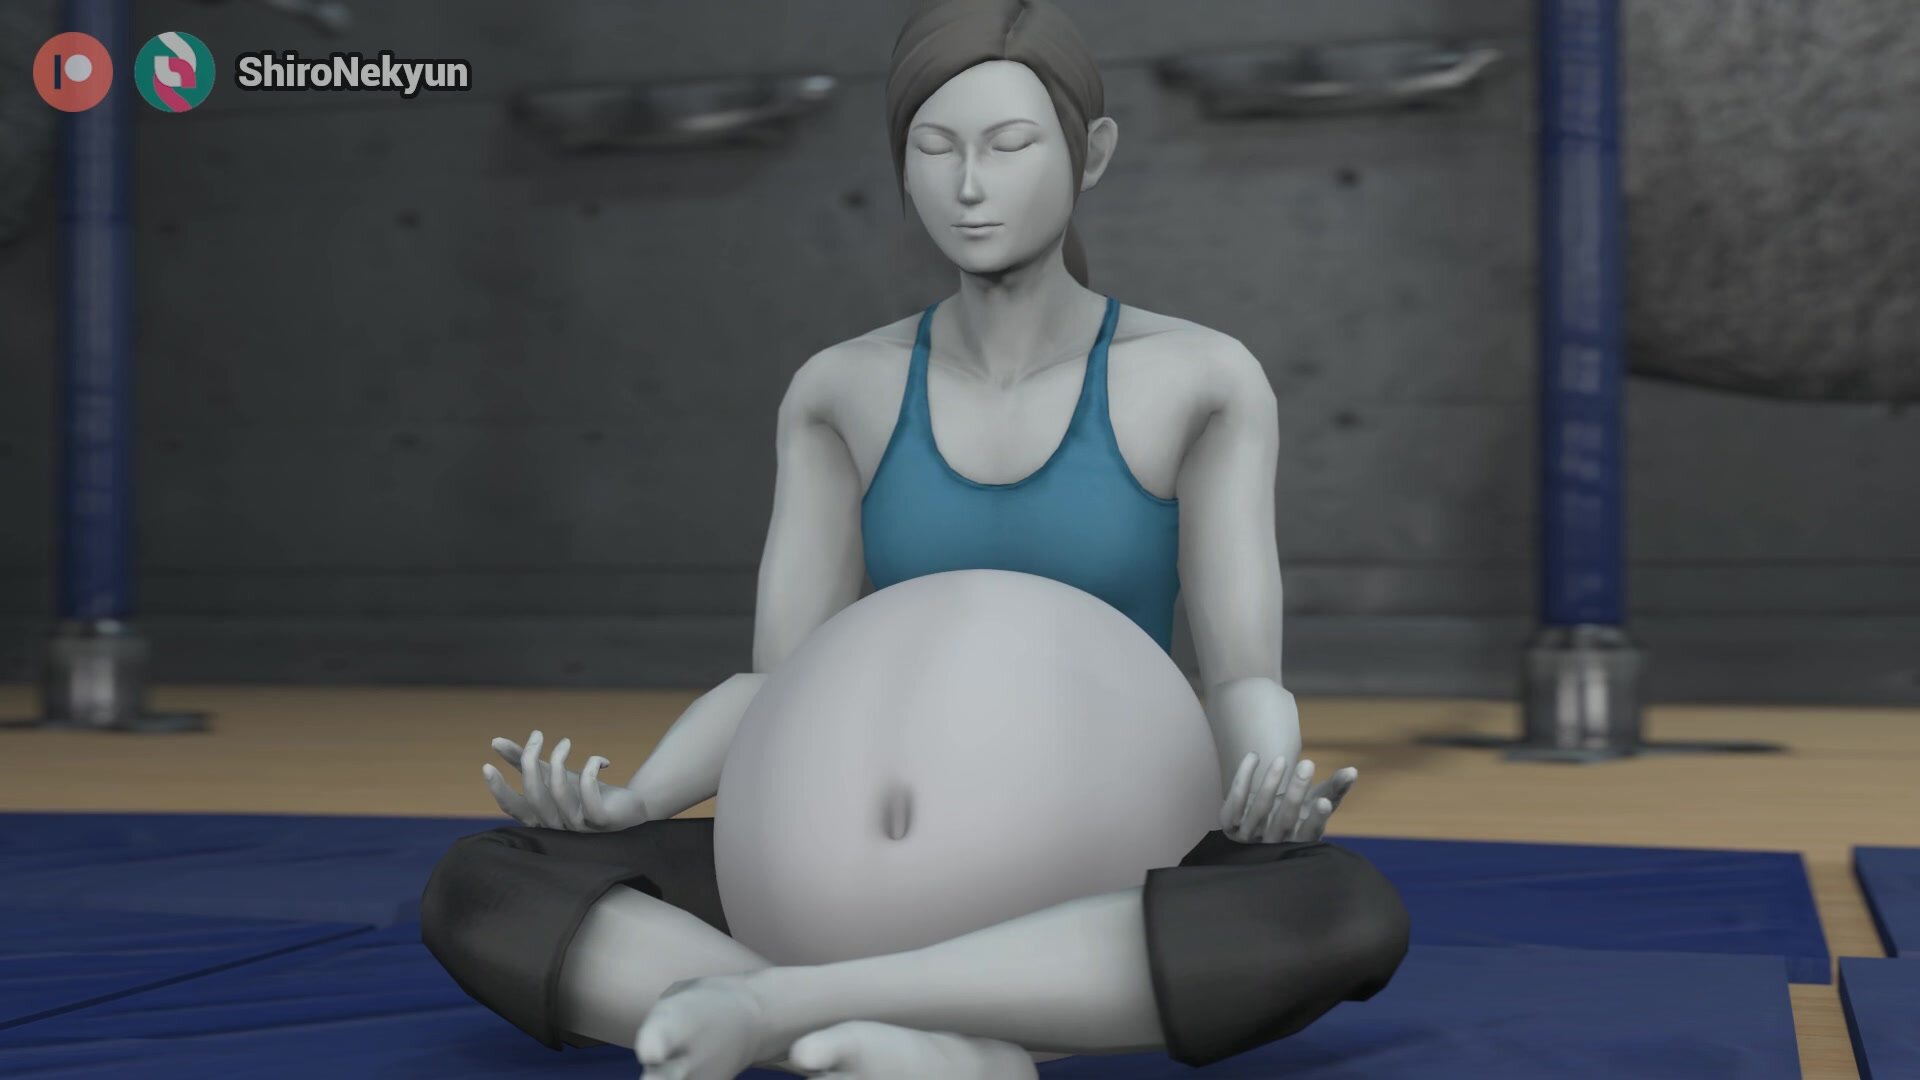 Wii Fit Trainer Doing Her Workout and Yoga Routine